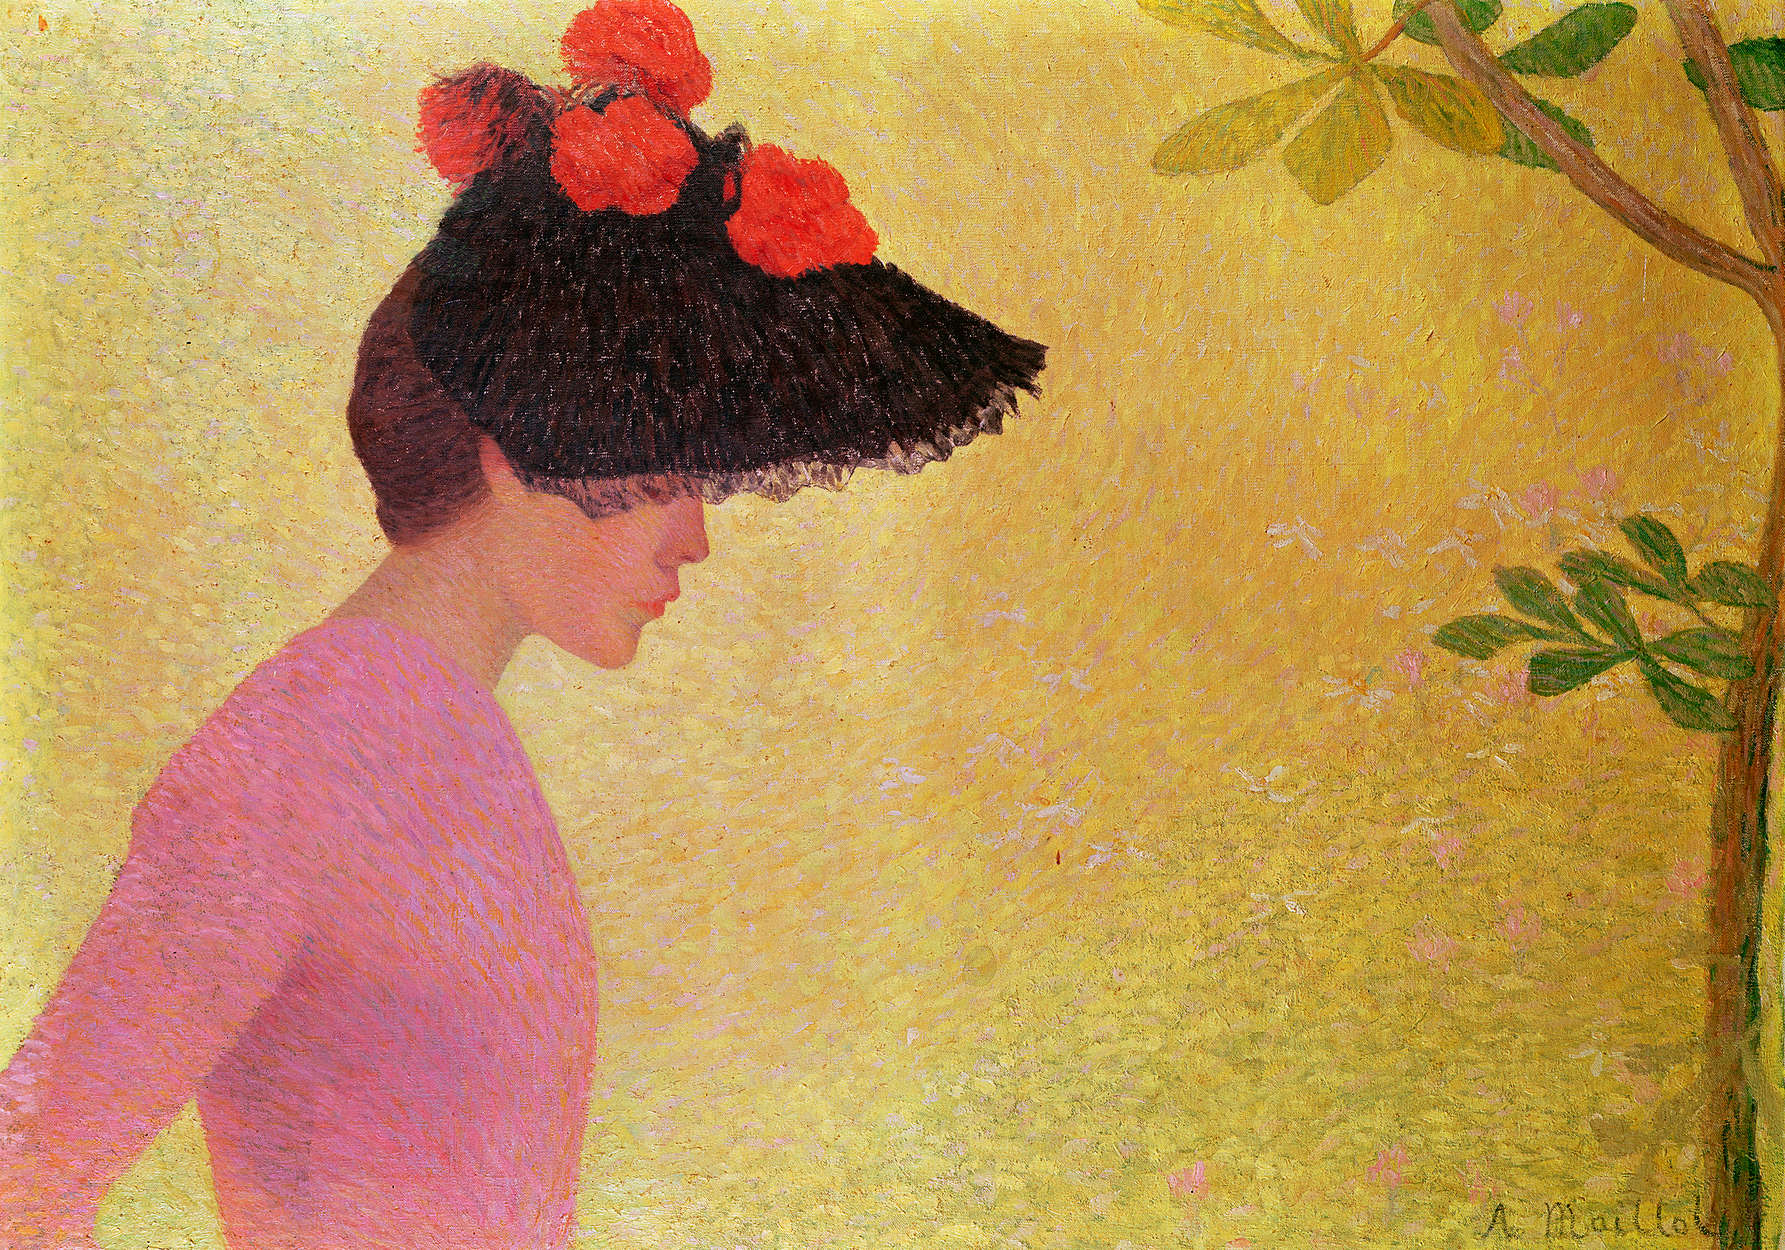             Photo wallpaper "Profile of a young woman" by Aristide Maillol
        